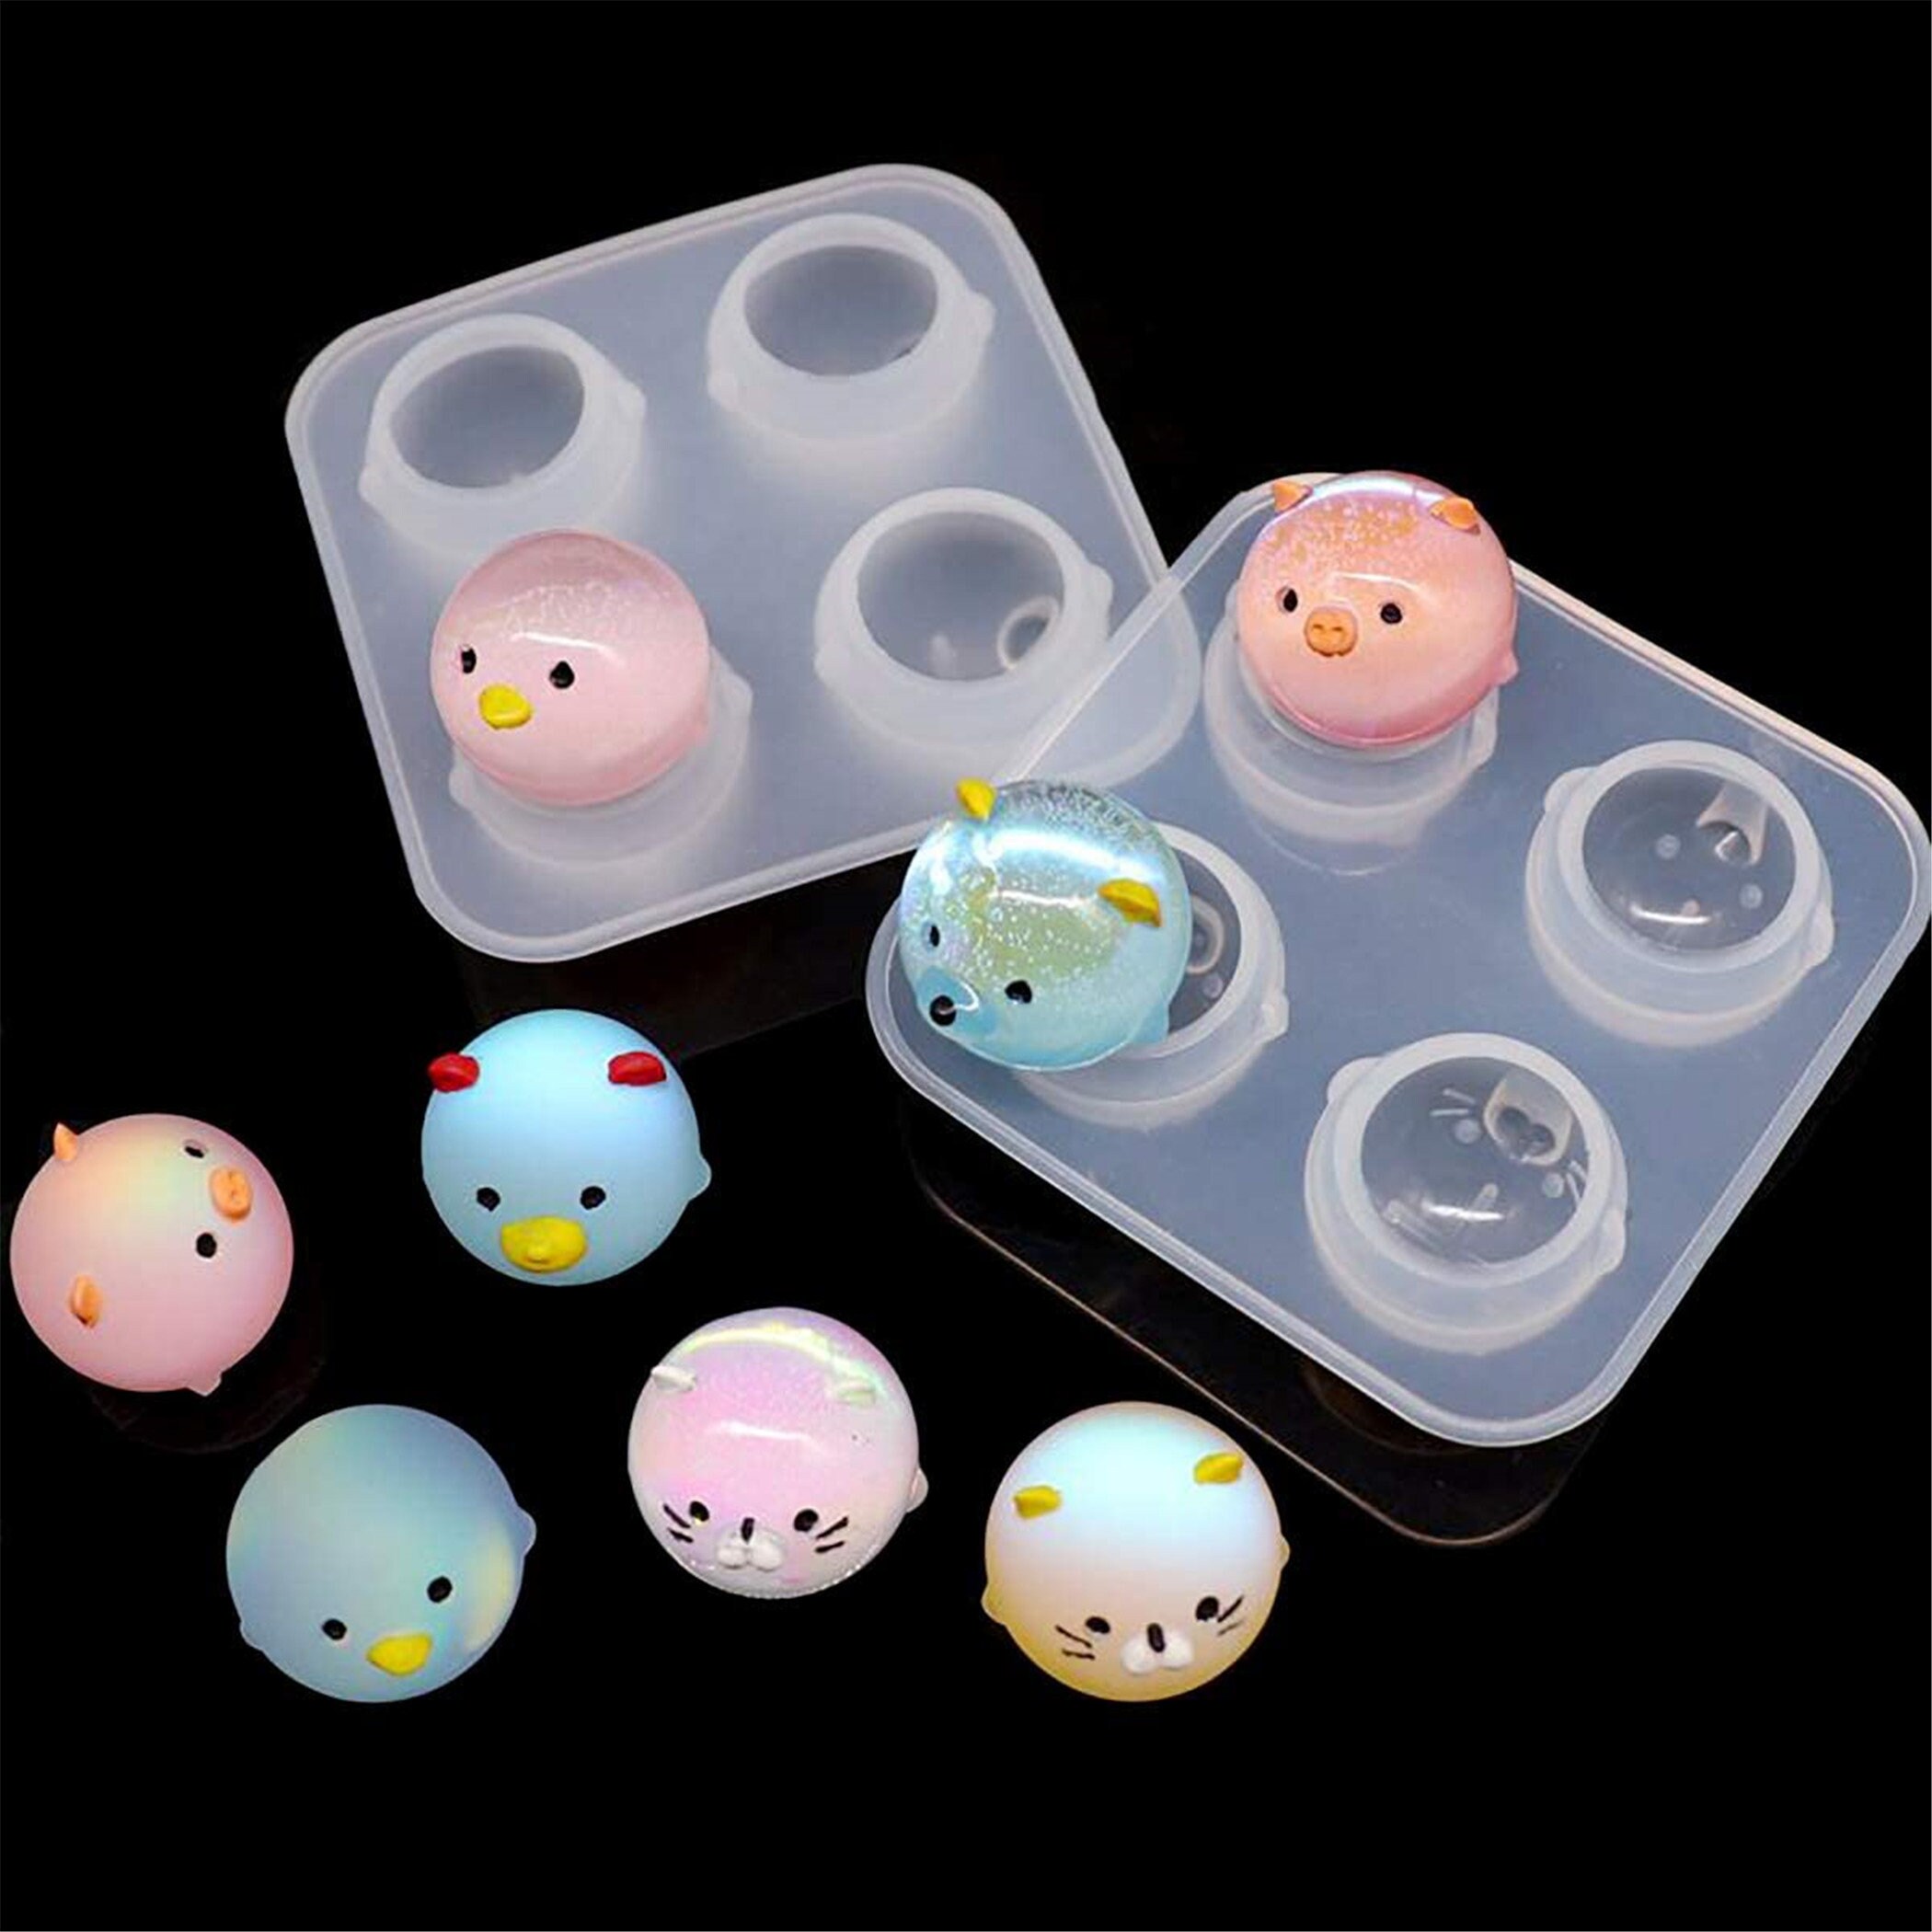 Wuff Meow 3D Animal Resin Molds Tools Resin Casting Molds Epoxy Silicone Molds for Resin Craft DIY Silicone Casting Mold DIY Home Decorations